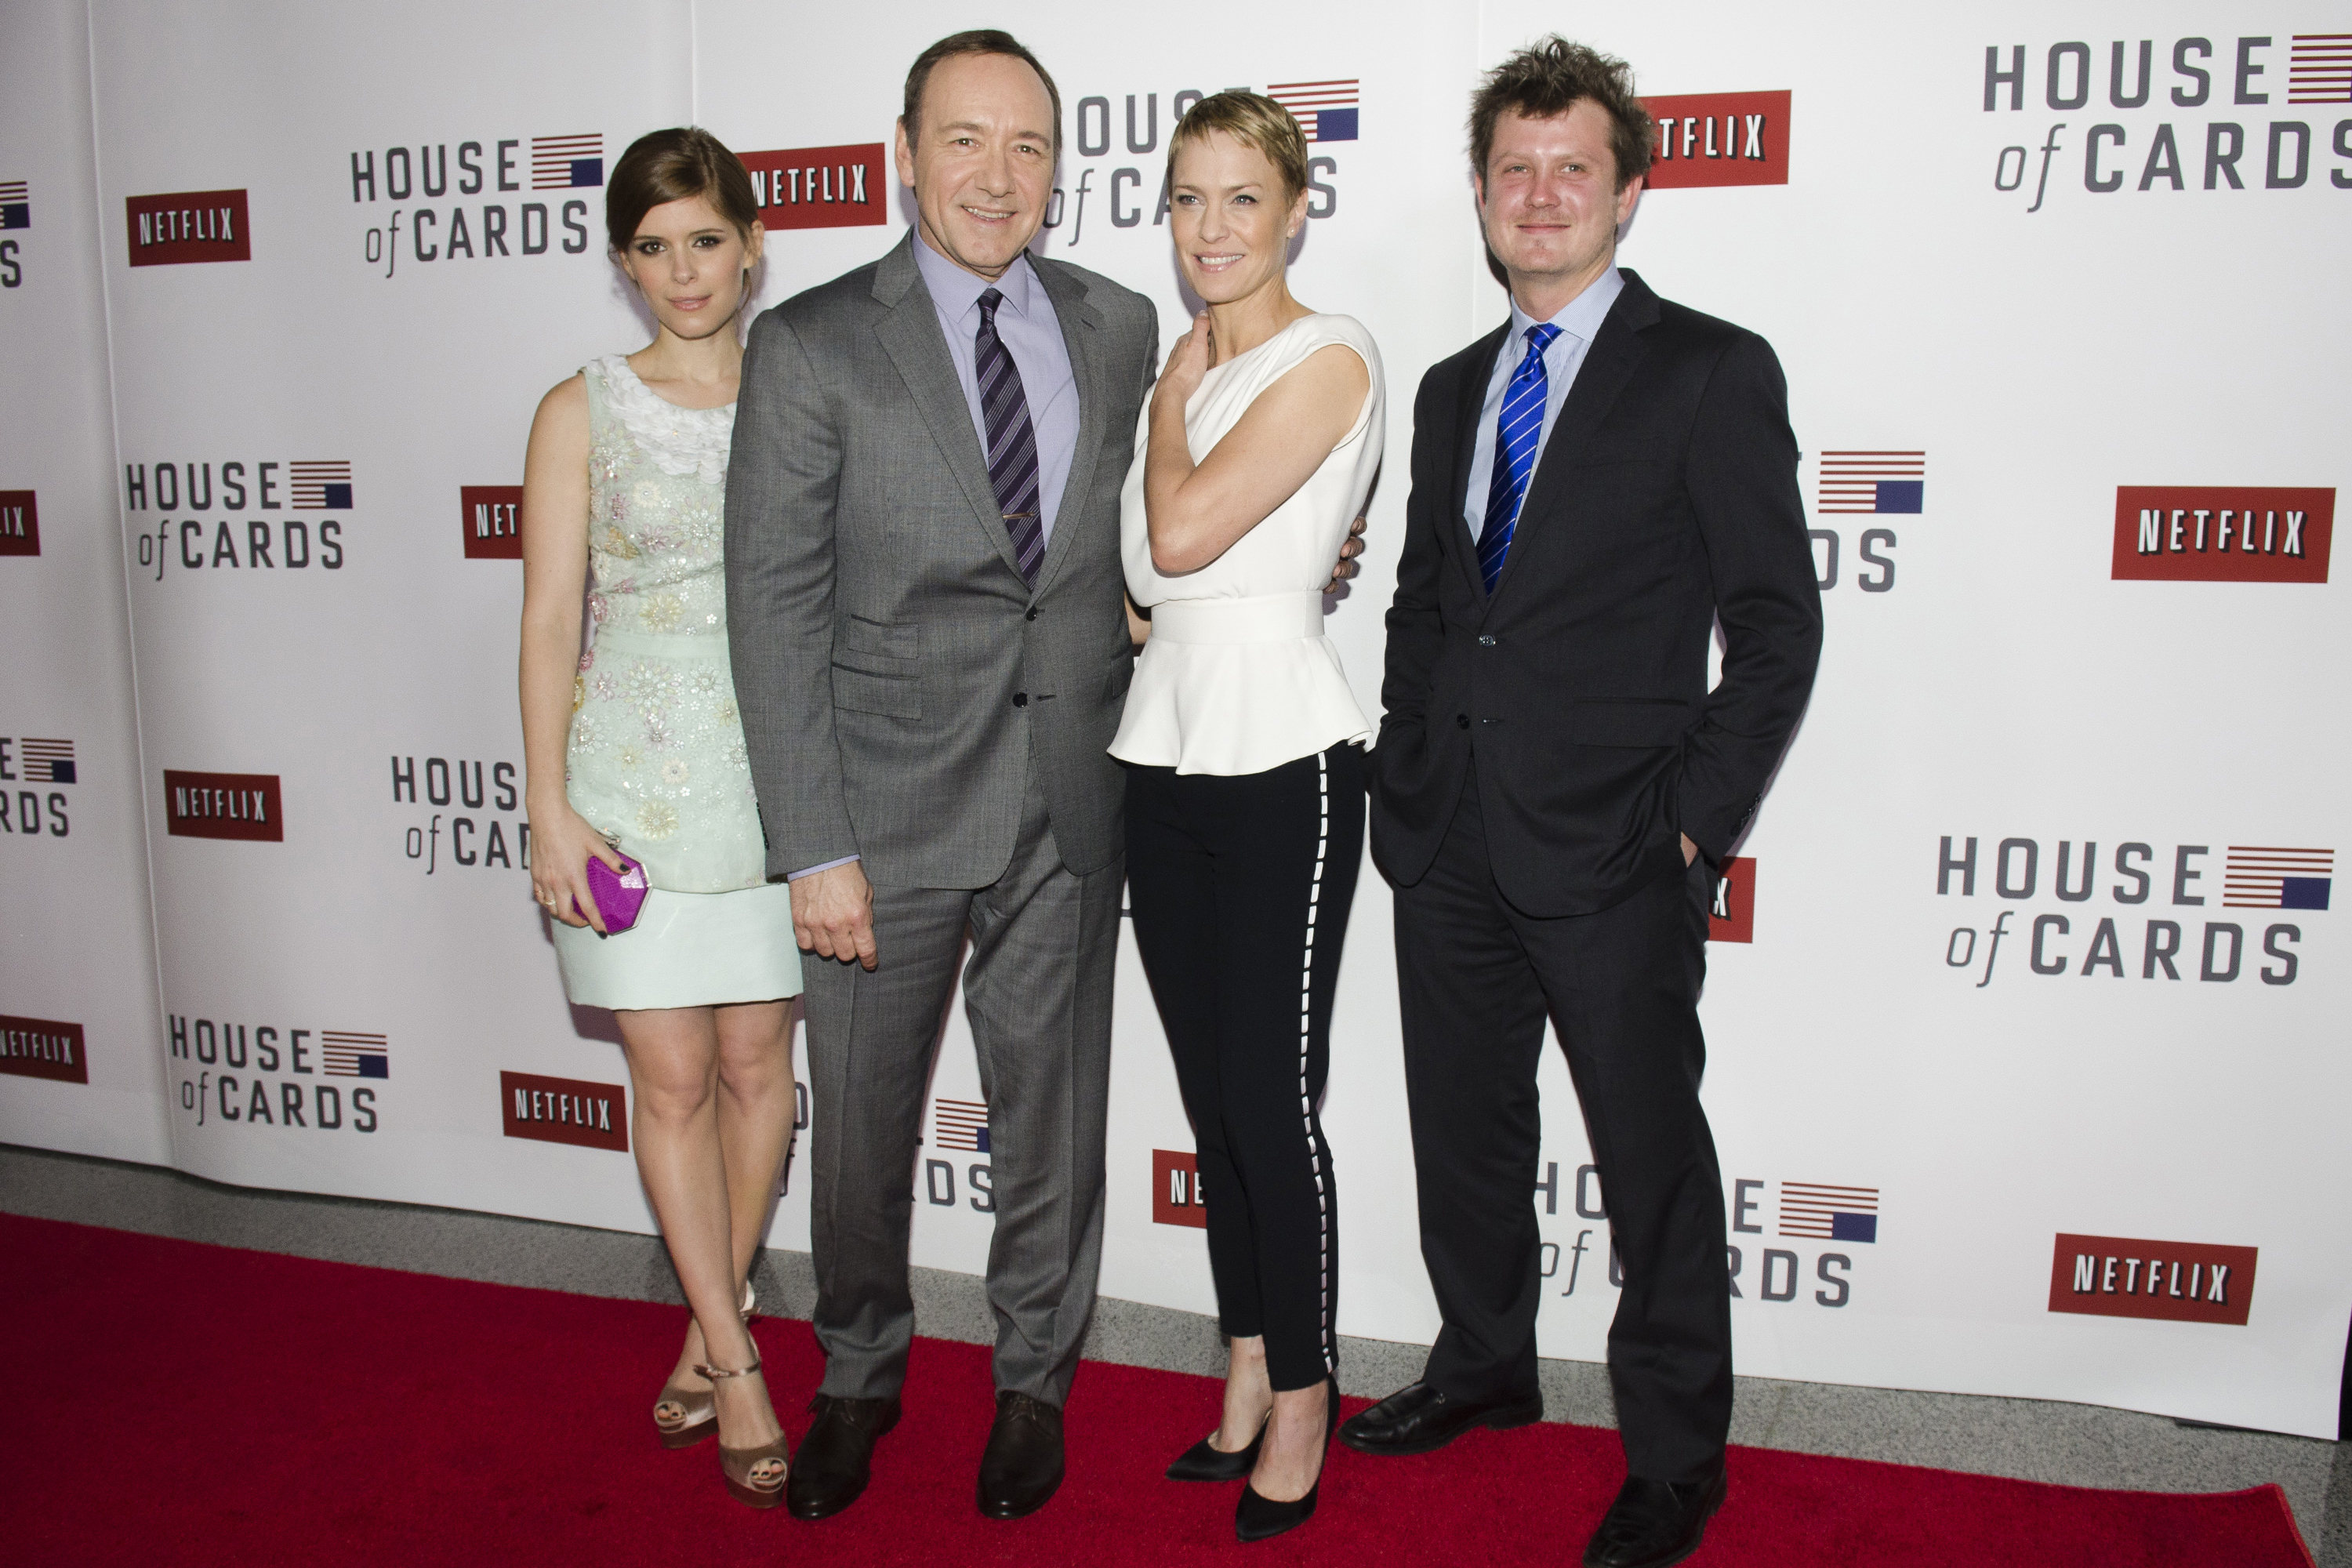 Outstanding Drama Series: House Of Cards • Netflix • Donen/Fincher/Roth and Trigger Street Productions, Inc. in association with Media Rights Capital for Netflix